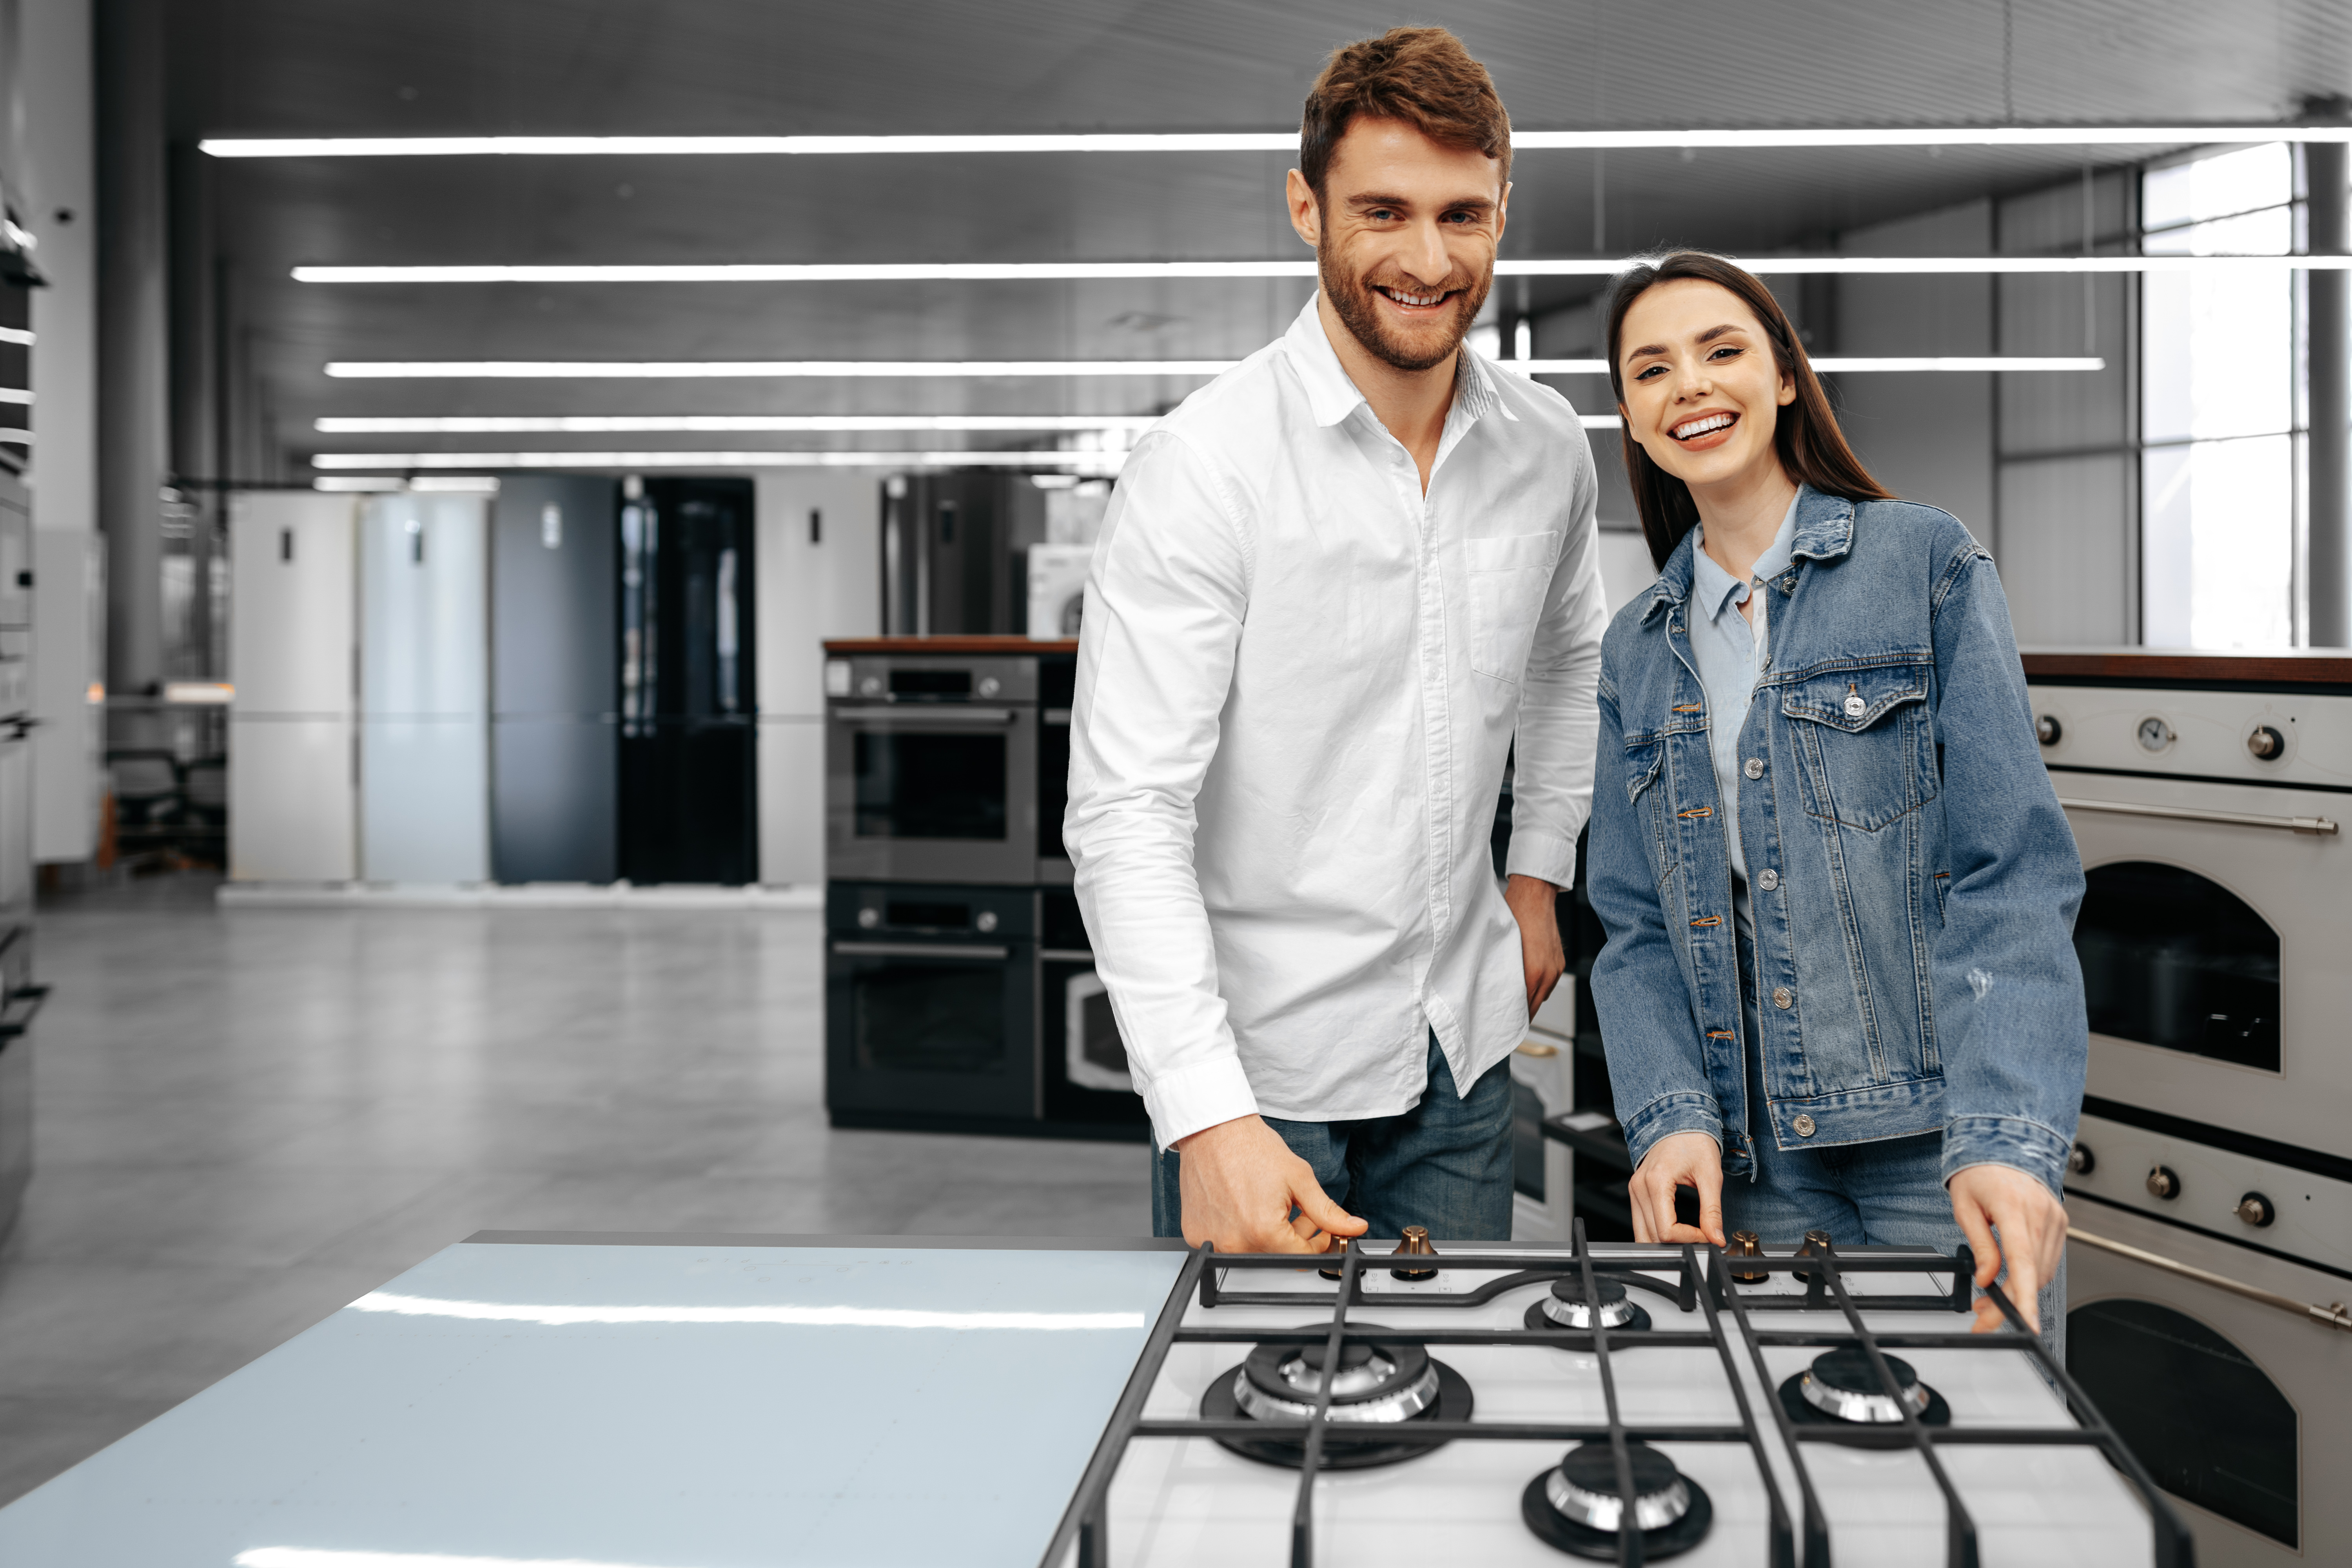 Find the Best Appliance Retailers in Calgary